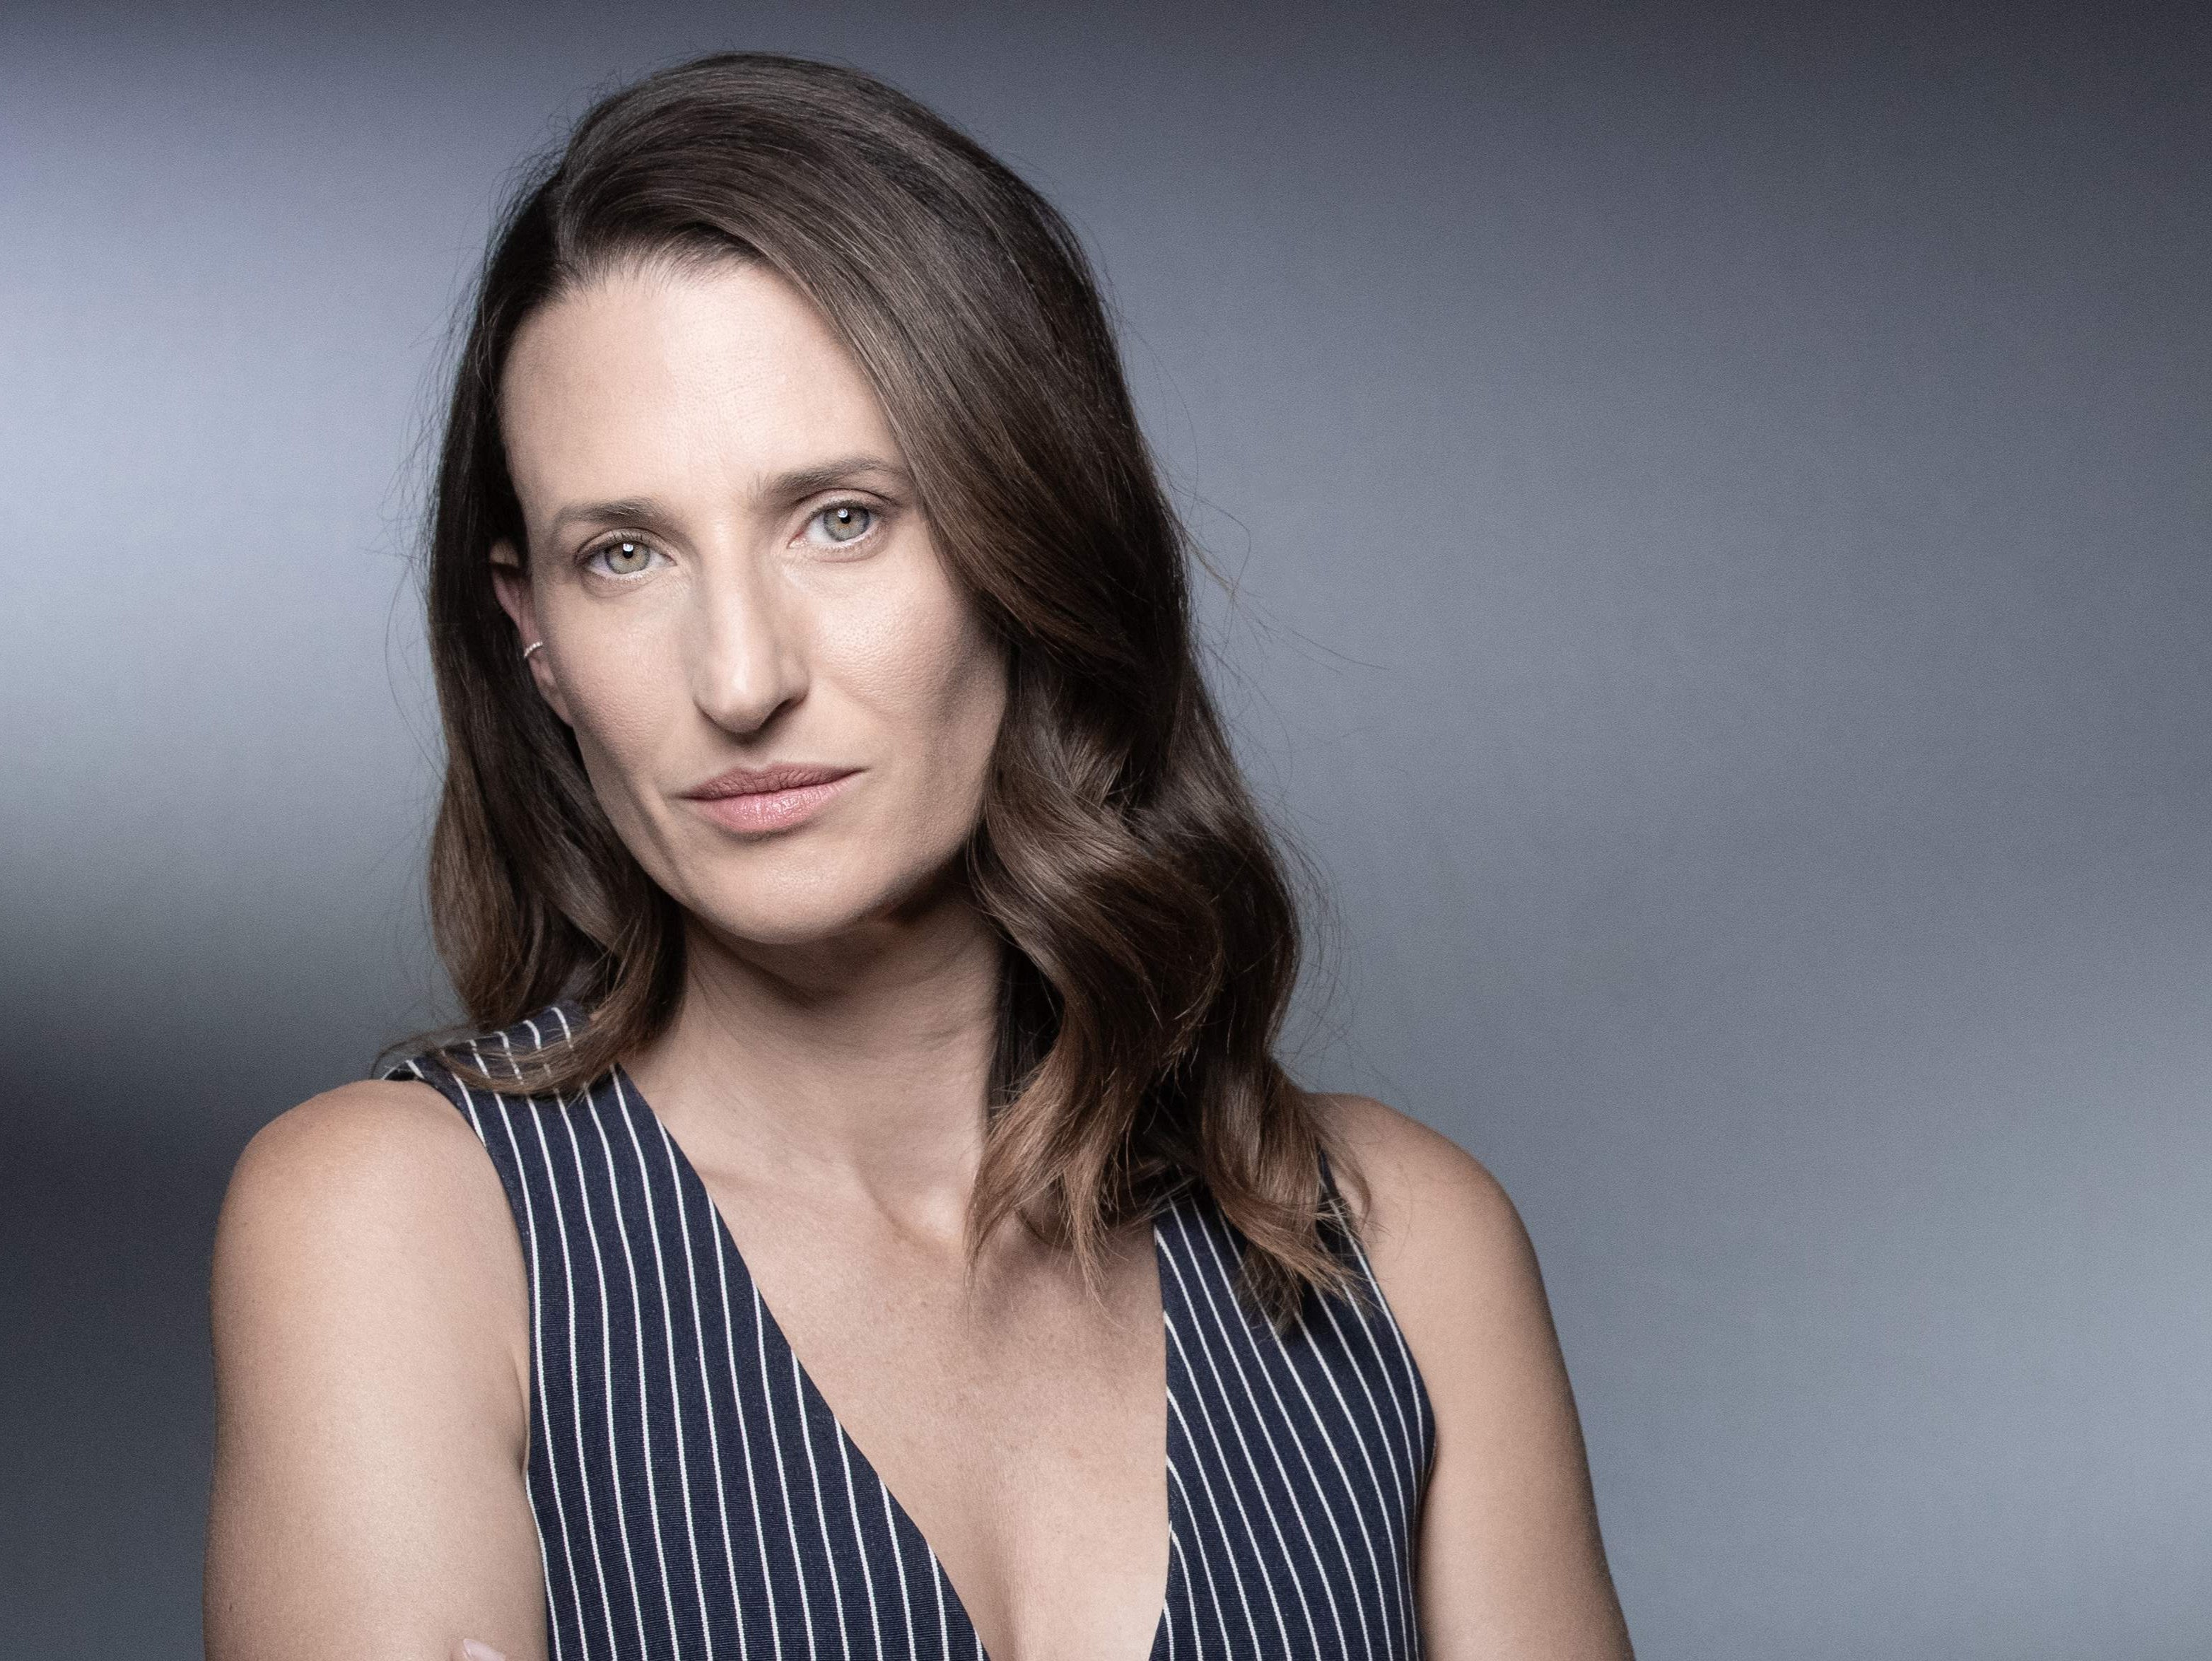 Camille Cottin In Stillwater Wallpapers